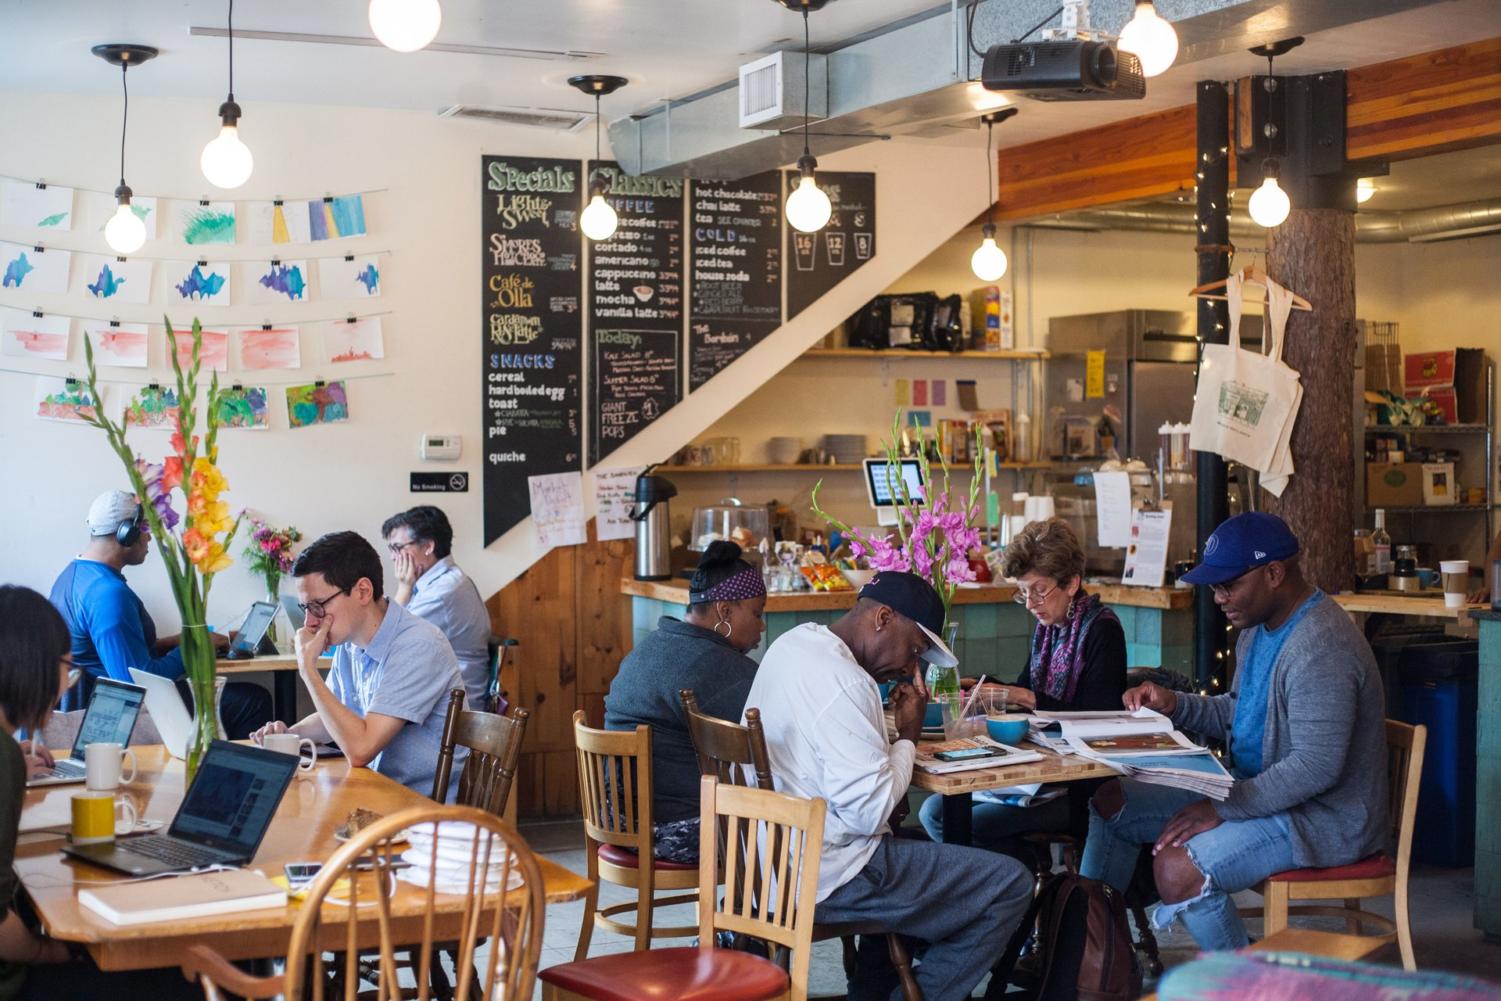 A hybrid bookshop-cafe, Build Coffee also acts as a small venue for artists’ gallery shows, game nights, and mini-workshops and sells used press publications, magazines, comics, and other books on their shelves.